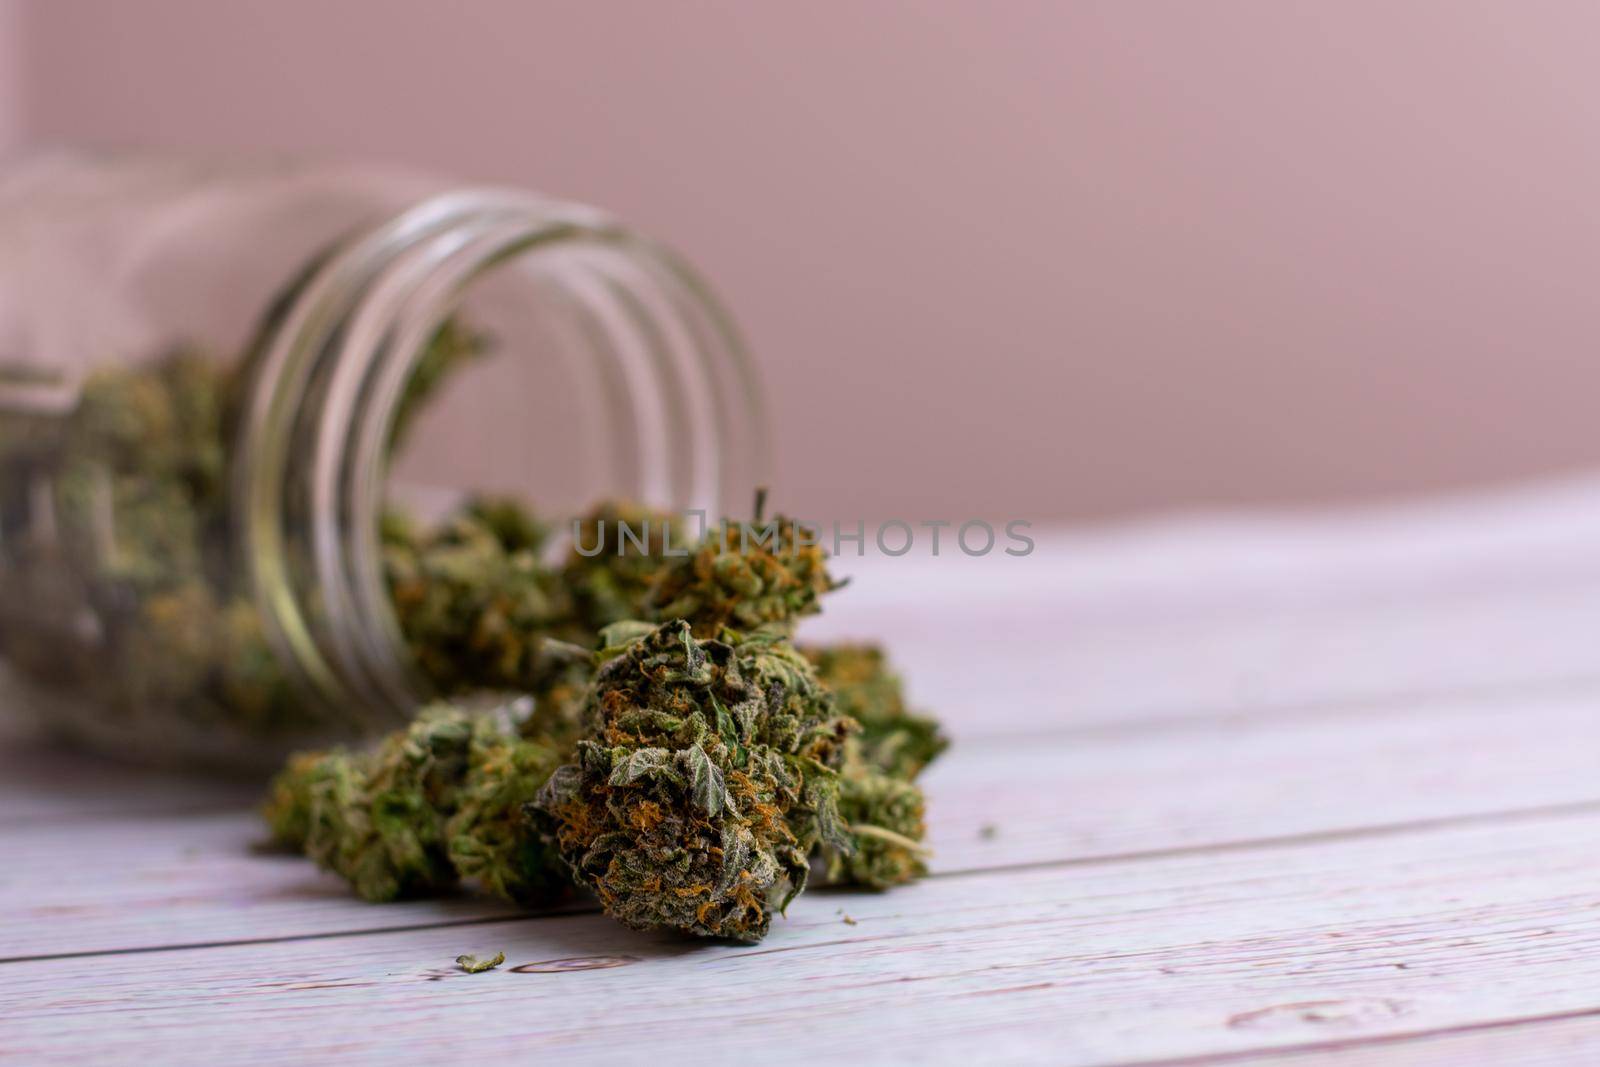 A Glass Jar With Colorful Cannabis Nugs Pouring Out of It by bju12290